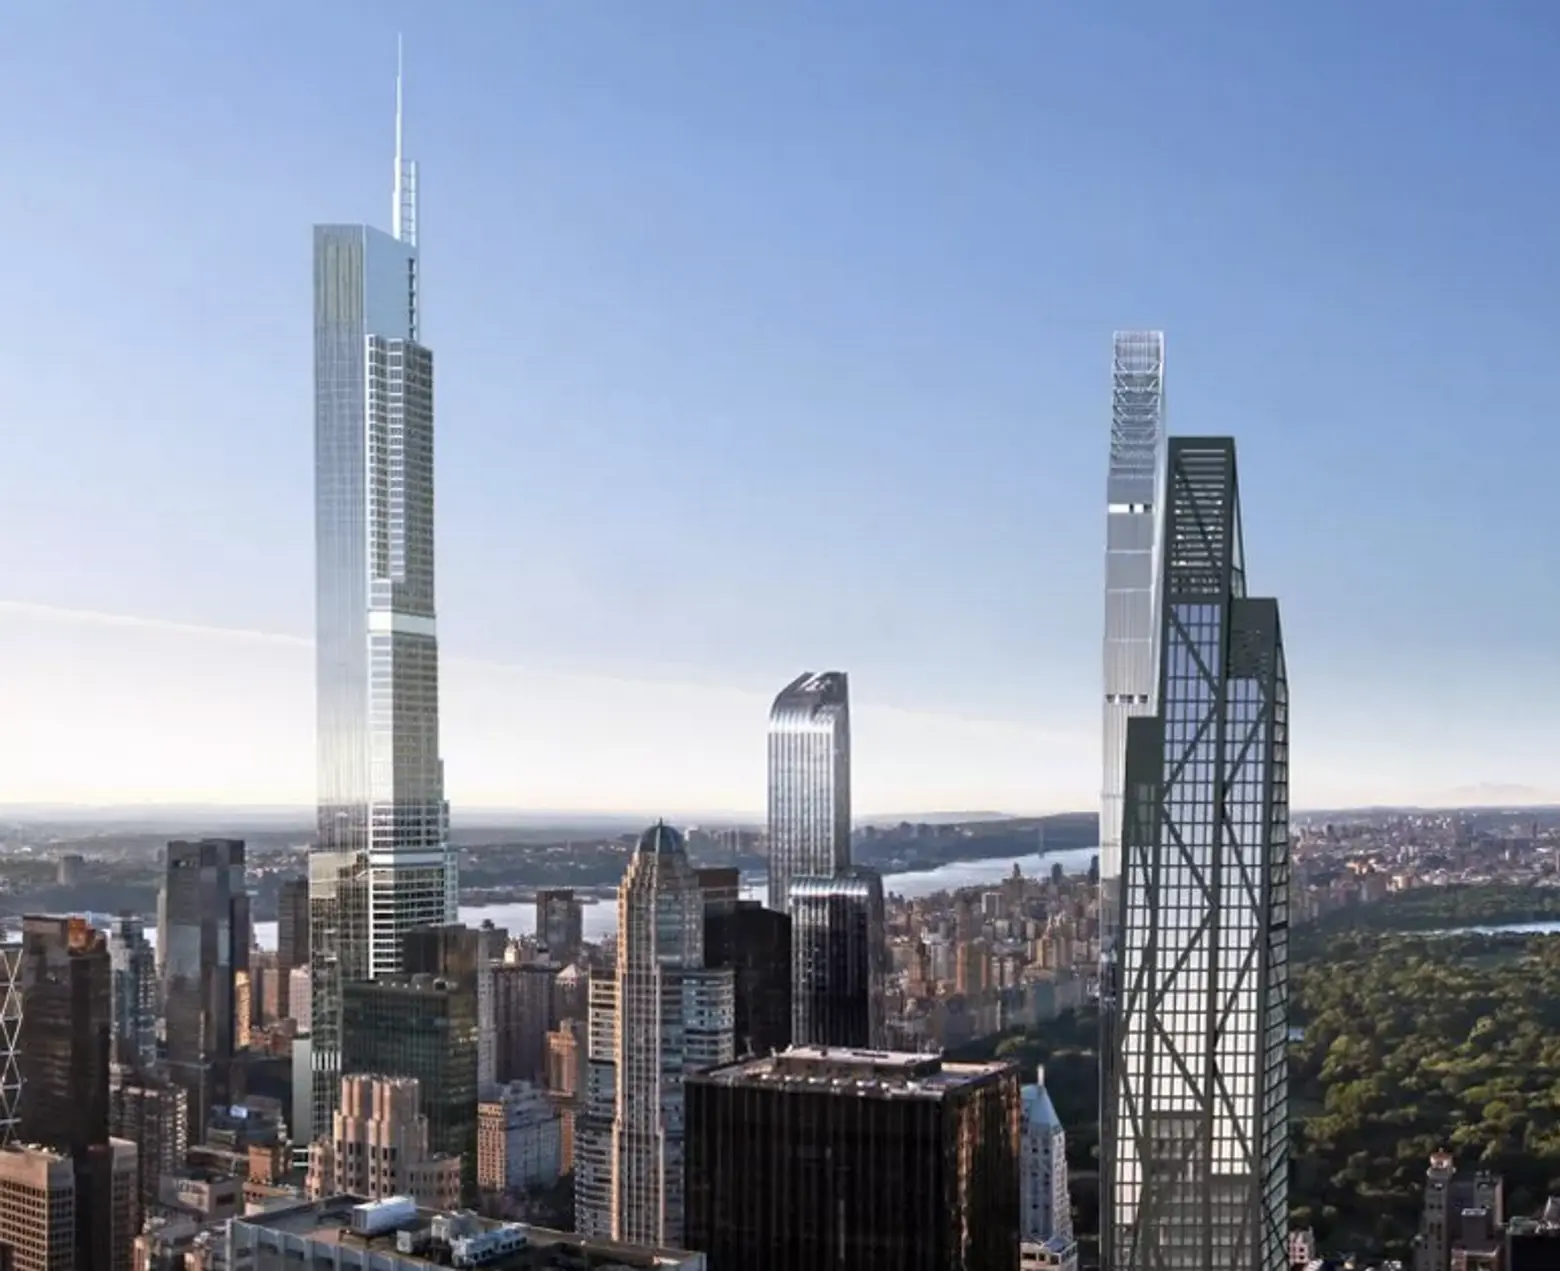 Nordstrom Tower Adds 20 Feet to Become the Tallest Building in NYC and Western Hemisphere